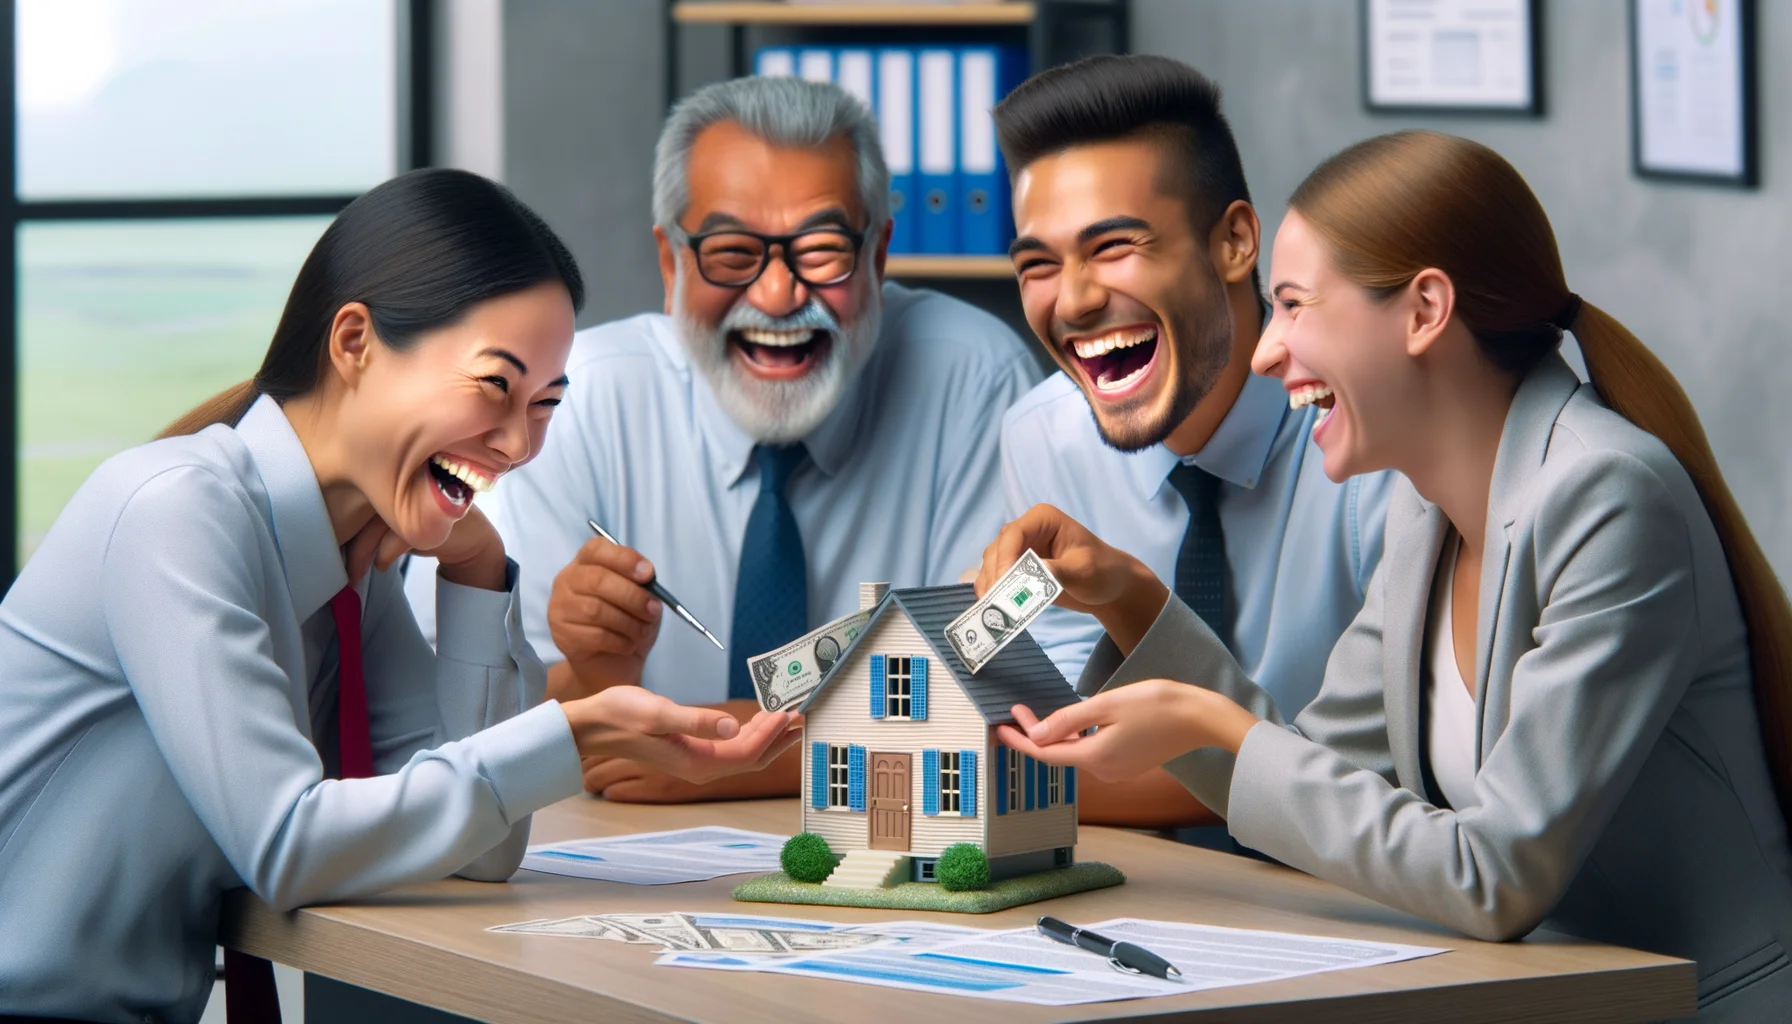 Generate an amusing real-life image set in a bank. A South Asian female bank employee is explaining a home loan assistance program in a unique way: using a small toy house that springs open to reveal mini dollar bills. A Caucasian male customer is laughing heartily at the spectacle, finding the visual representation funny. Meanwhile, a Hispanic male and a Middle-Eastern female, other customers at the bank, are chuckling in the background at this entertaining and humorous method of explaining home loan assistance programs.